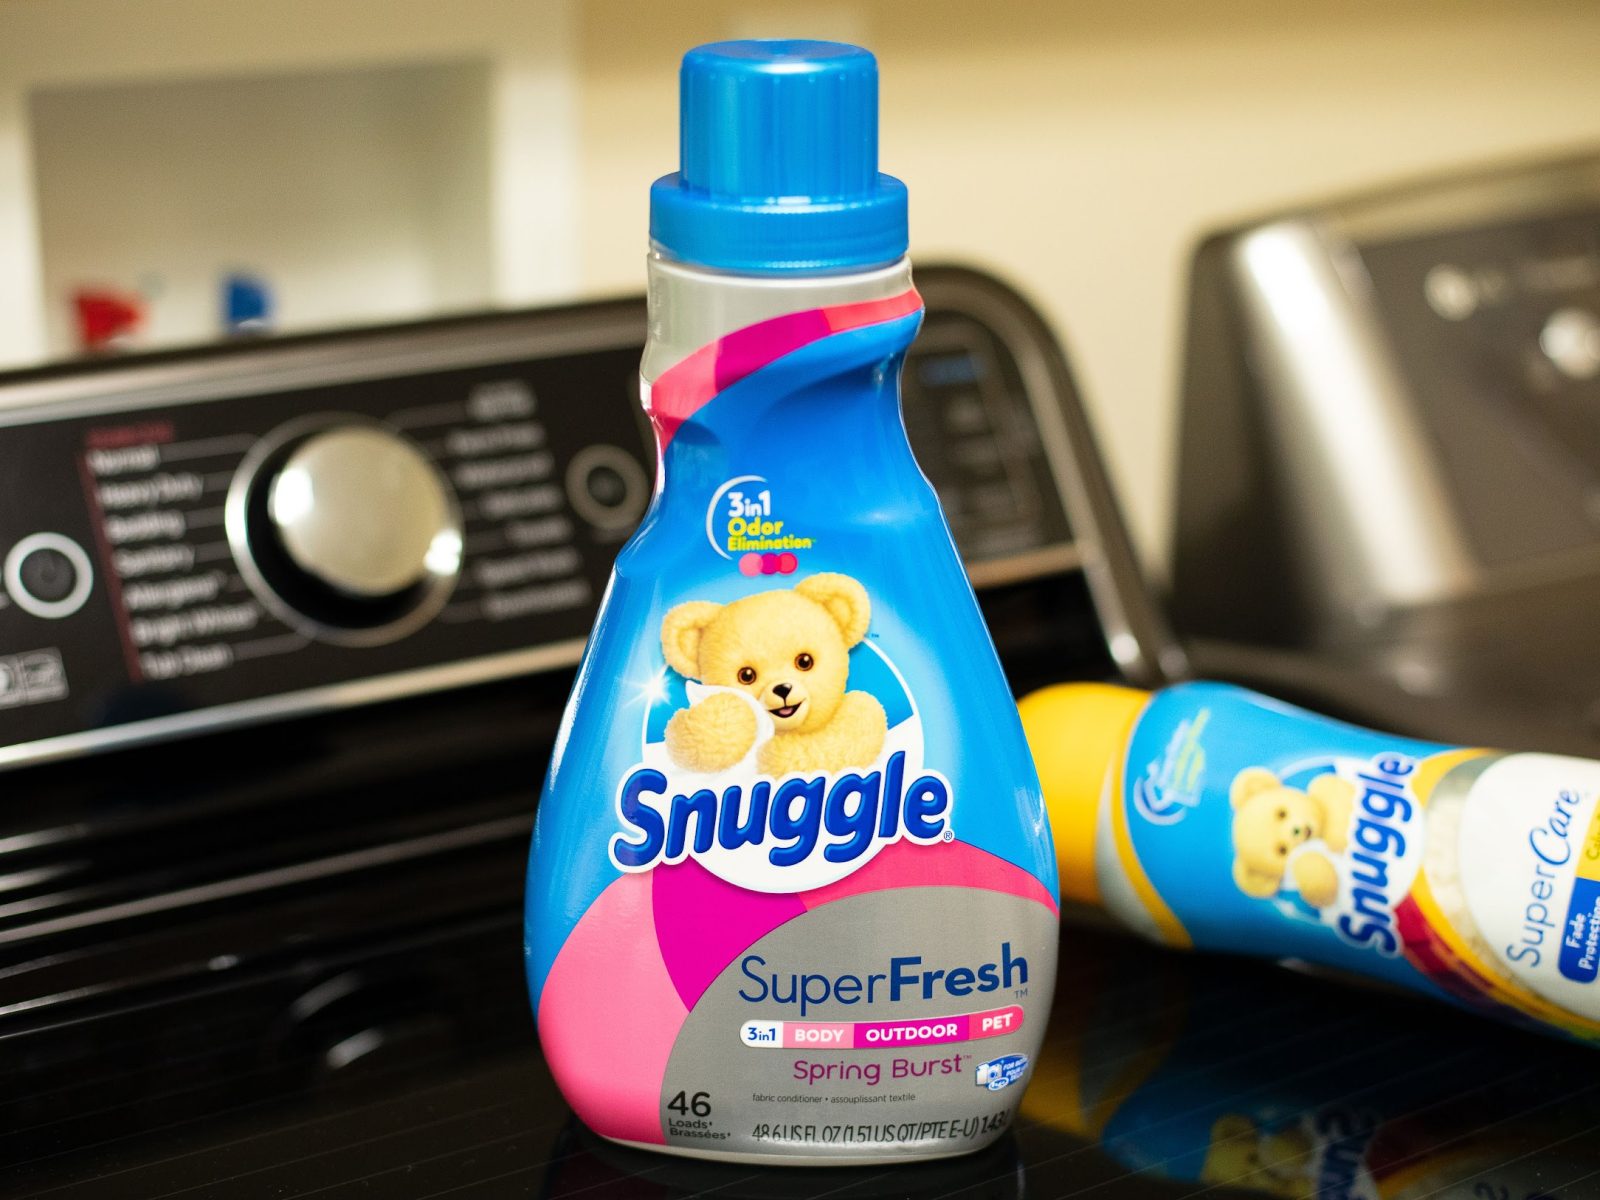 Snuggle Fabric Softener As Low As $3.50 At Publix